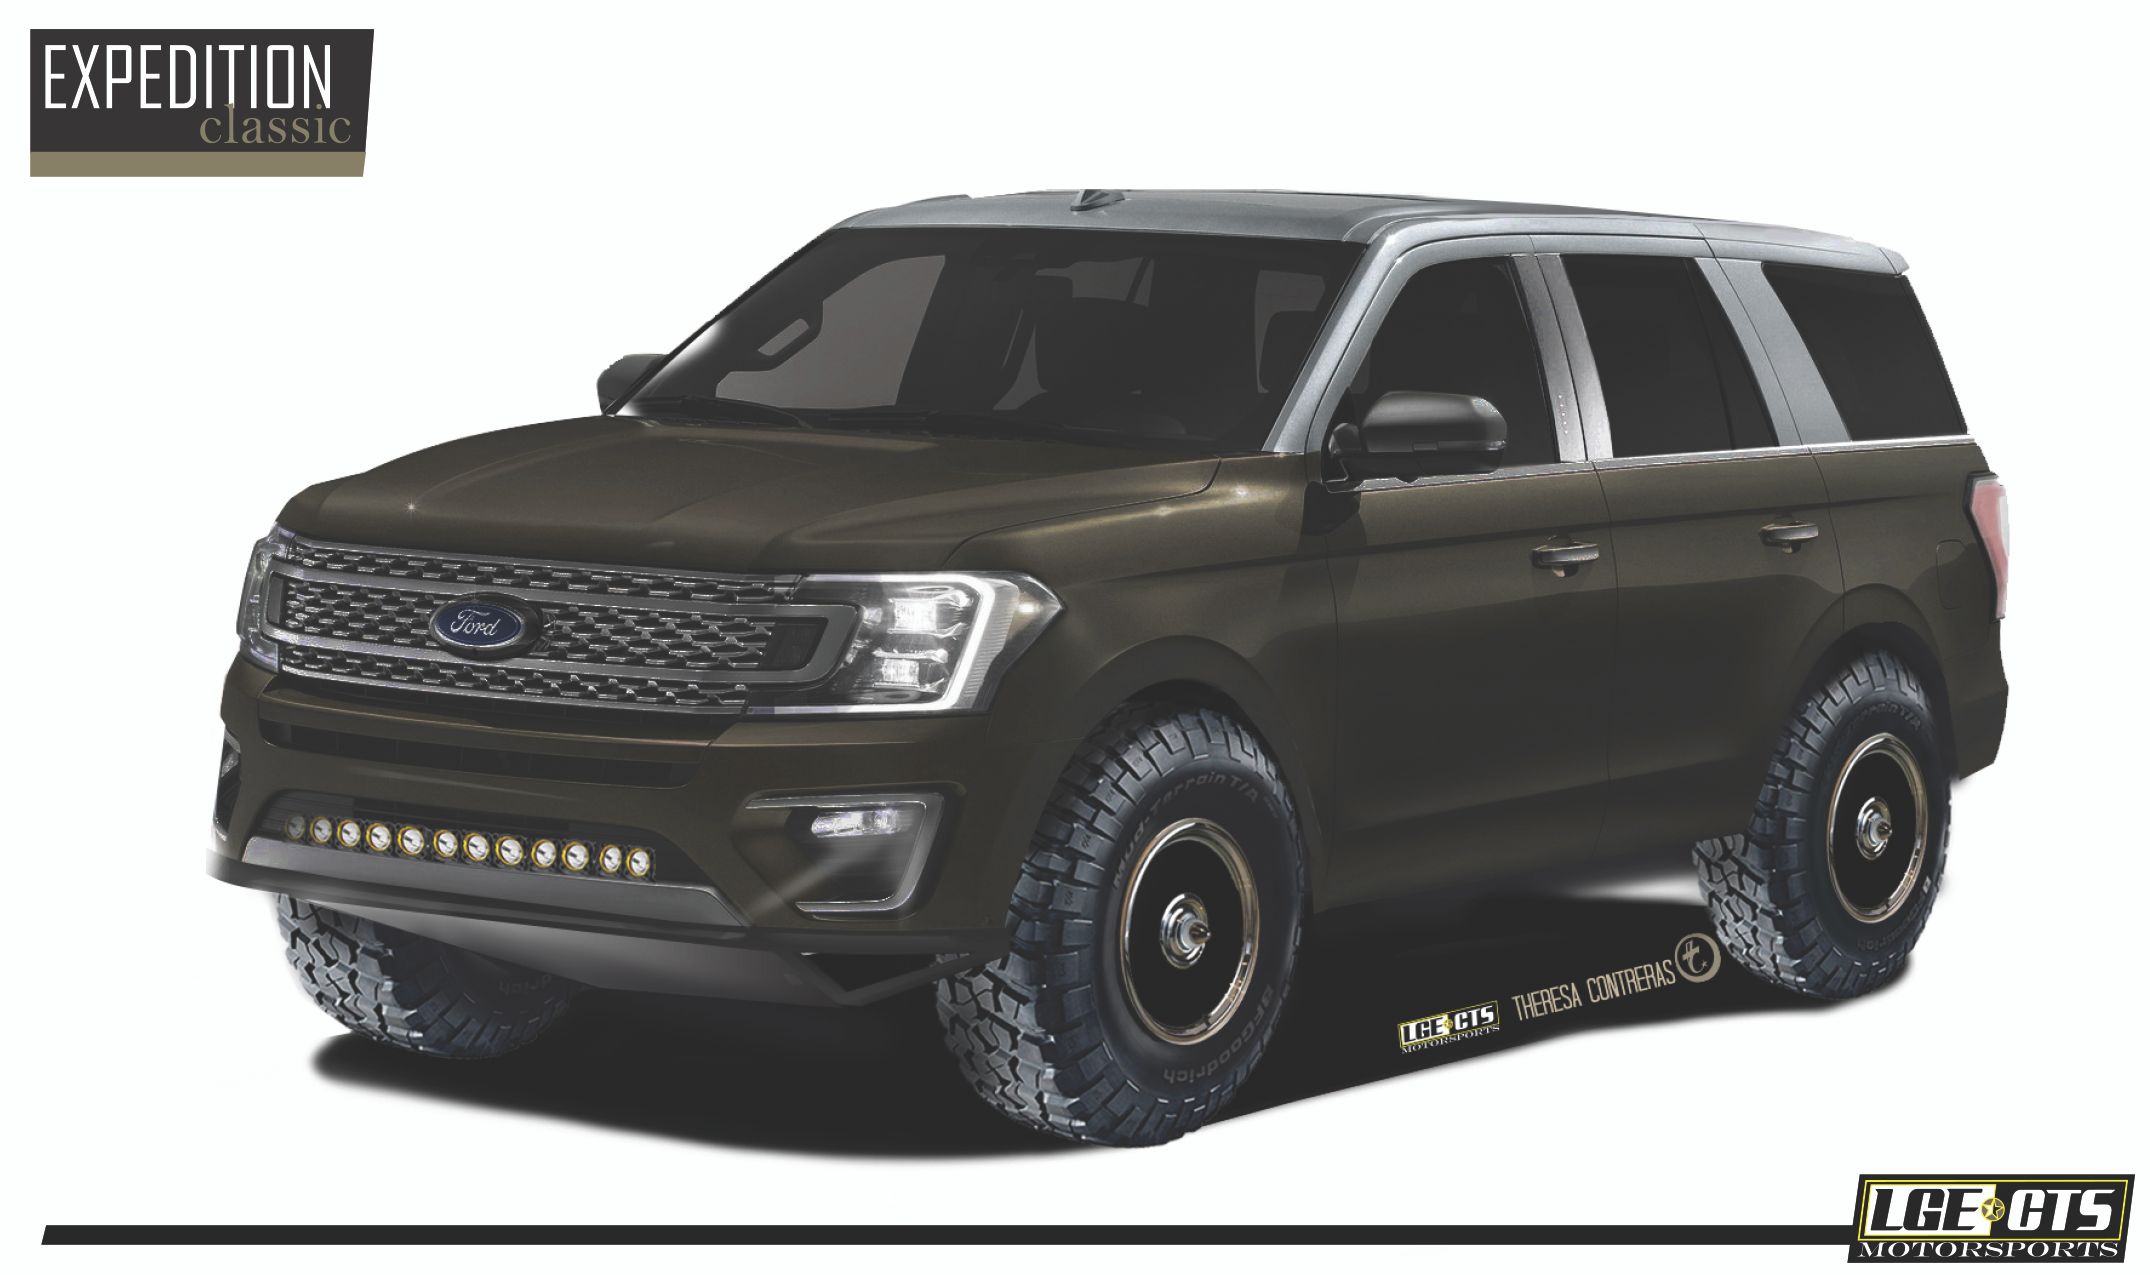 2018 Ford Expedition Classic by LGE*CTS Motorsports